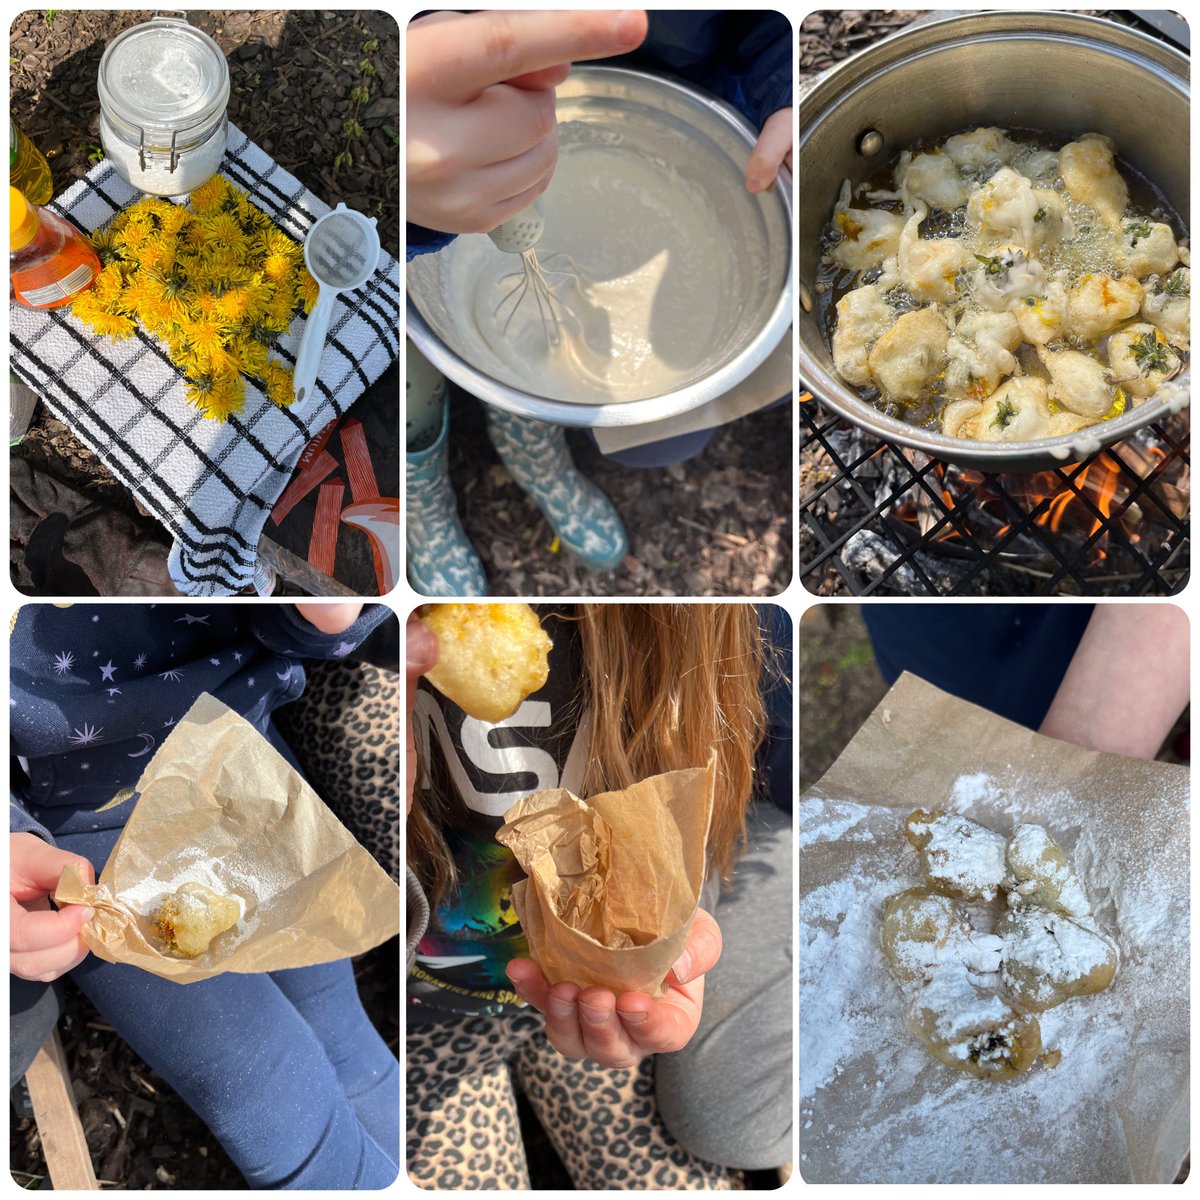 I think most people that follow me know how passionate I am about using books within outdoor education and nature connection. Today, a group of Yr3 girls rehearsed and performed the Dandelion Spell from #TheLostWords as part of a explorative session about Dandelions. They were